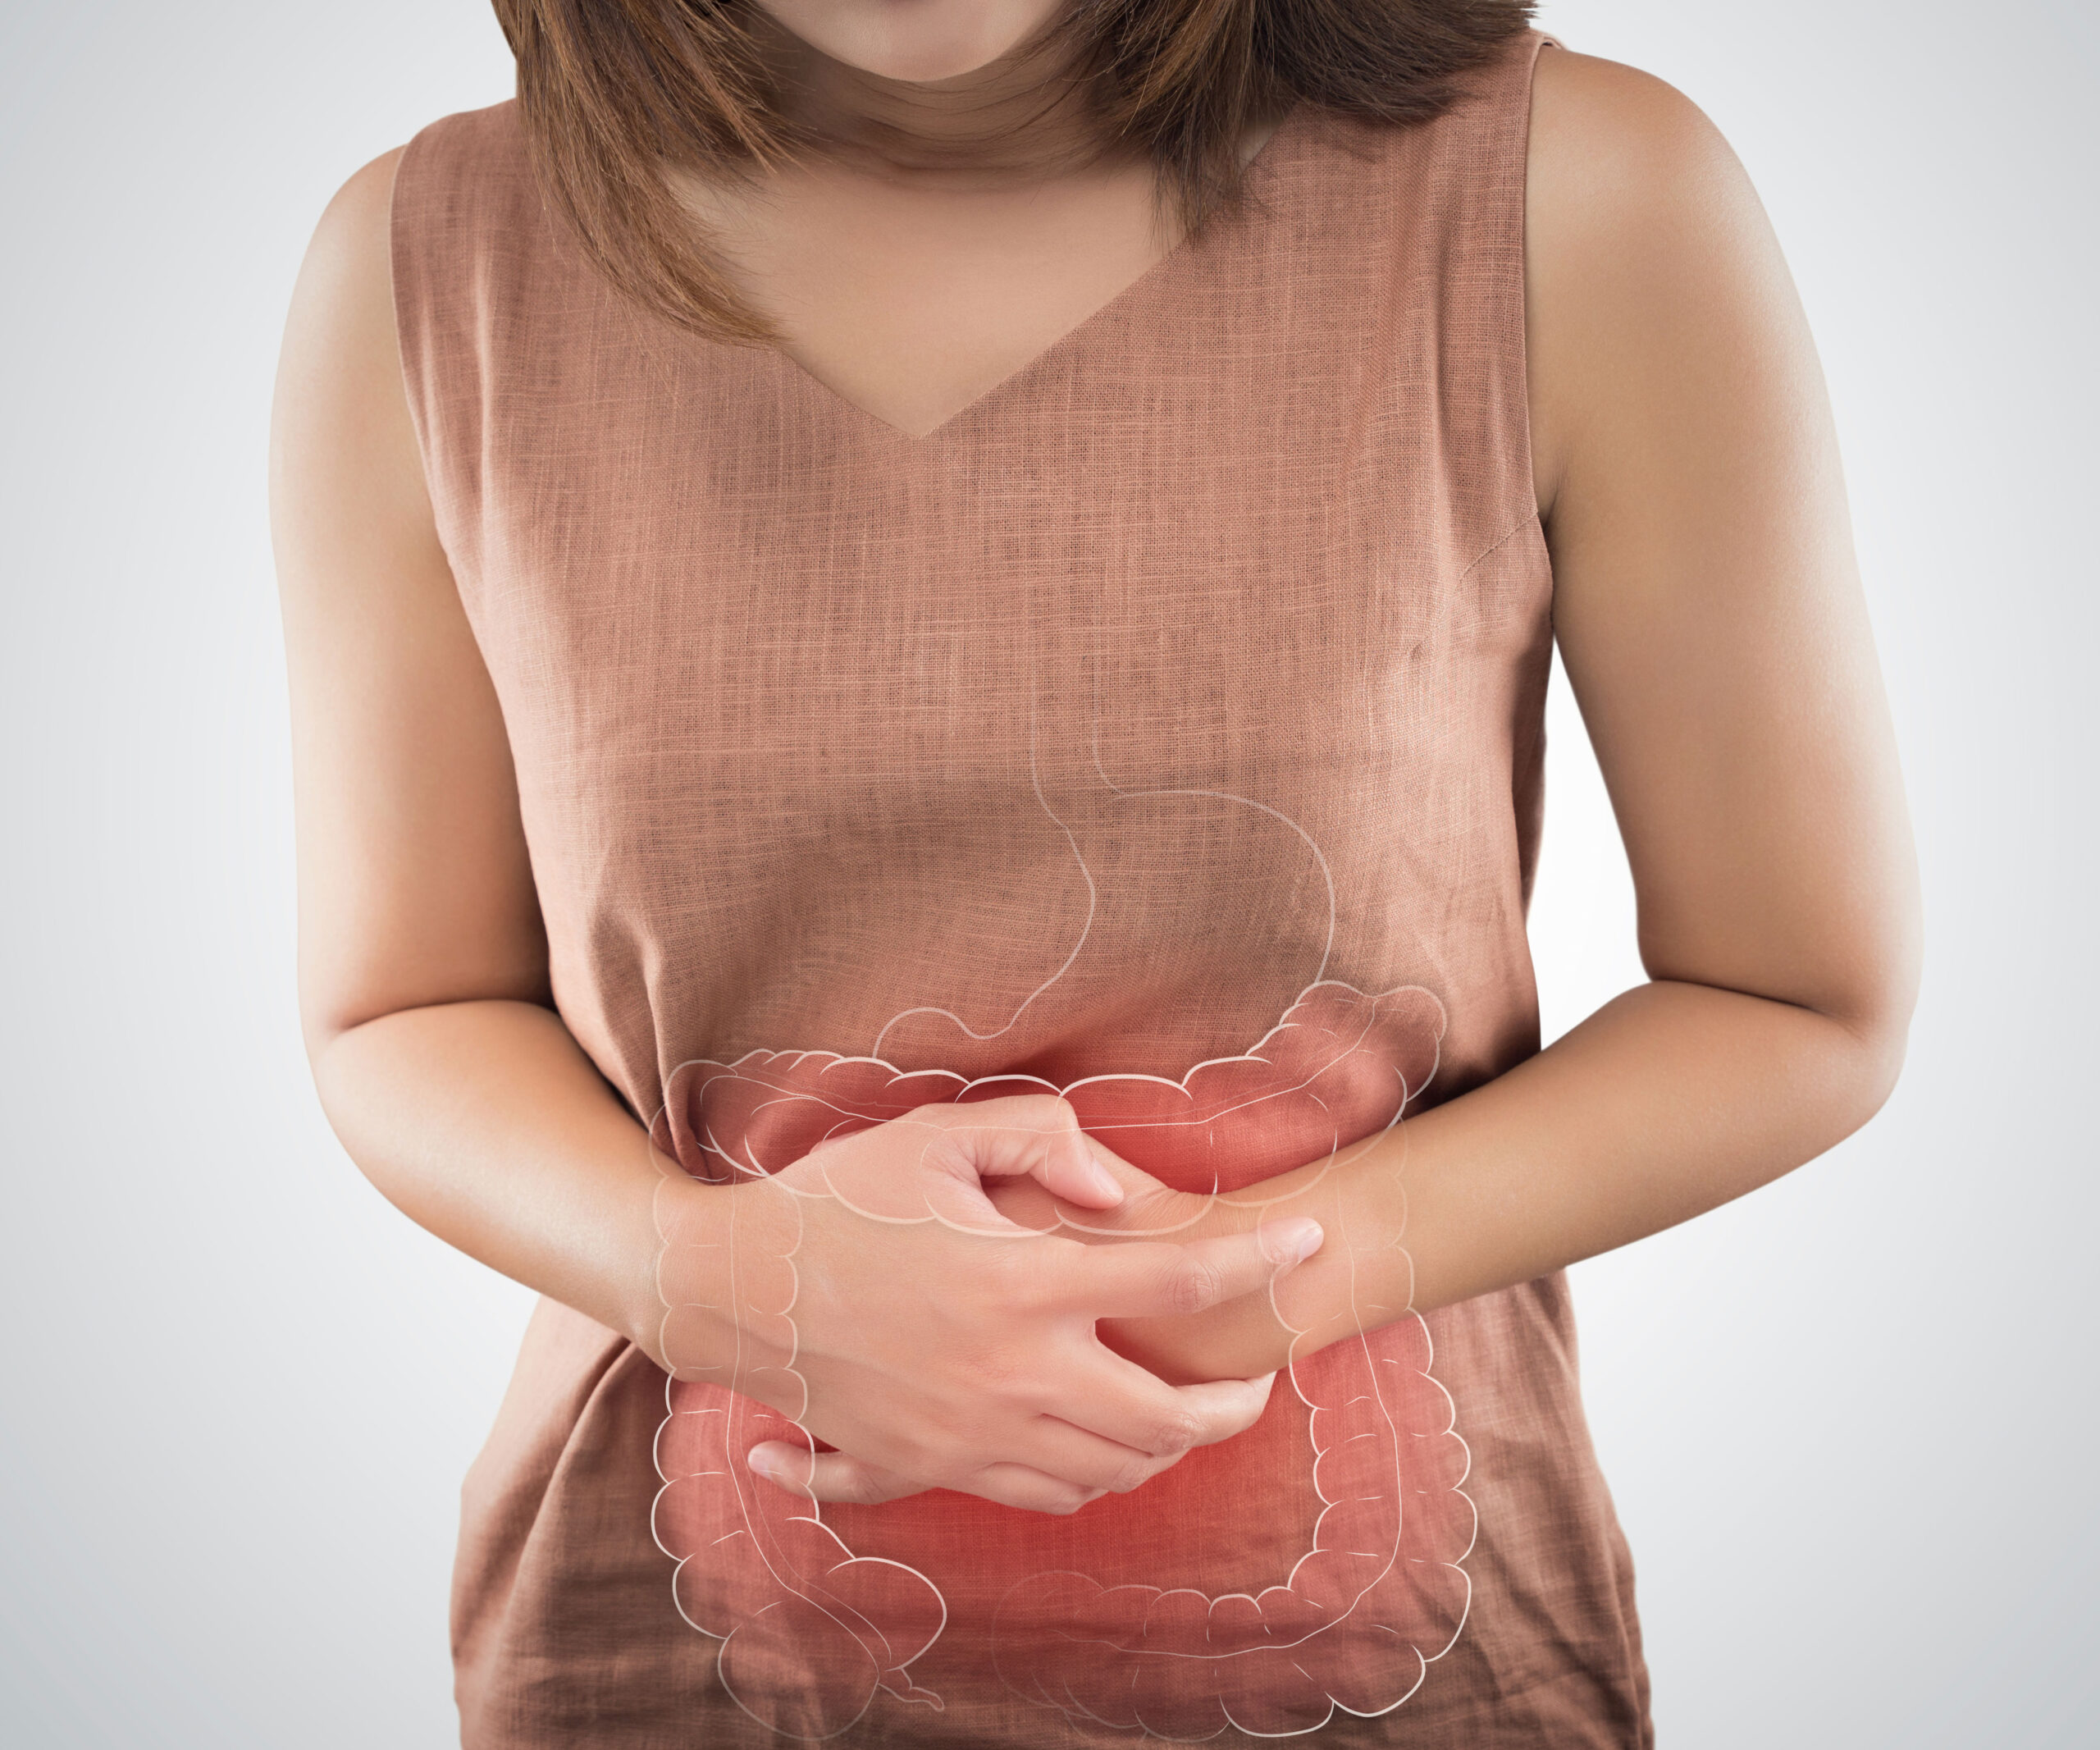 5 ways to fix bloating and what may be causing it